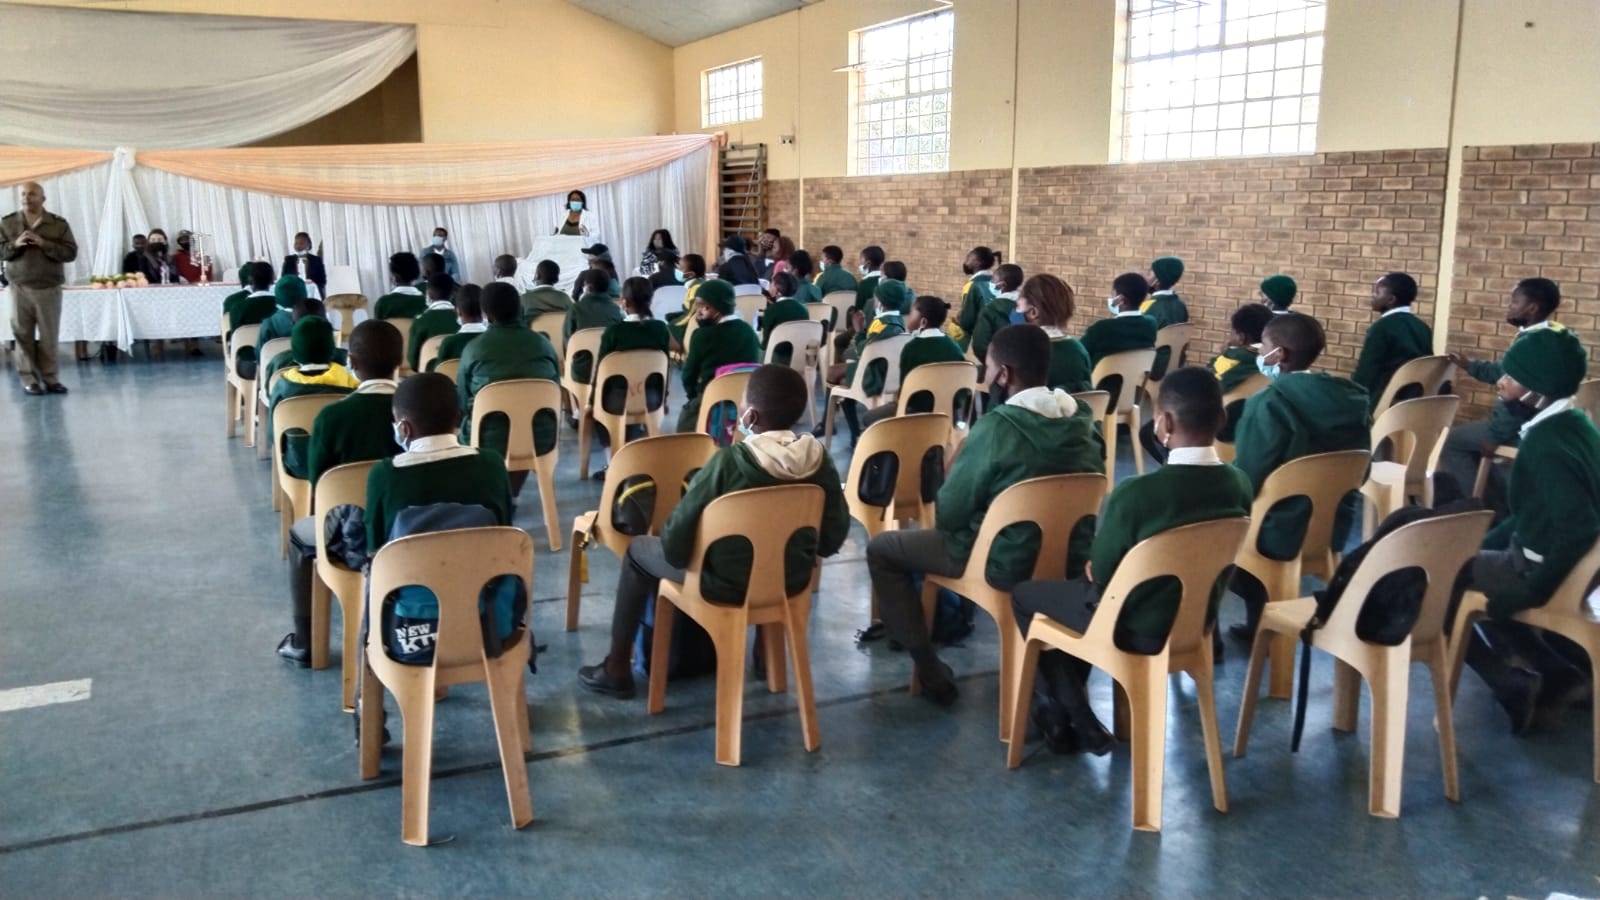 The Nduli Community Hall was recently abuzz when different role-players gathered to inform young people about the dangers of substance abuse.